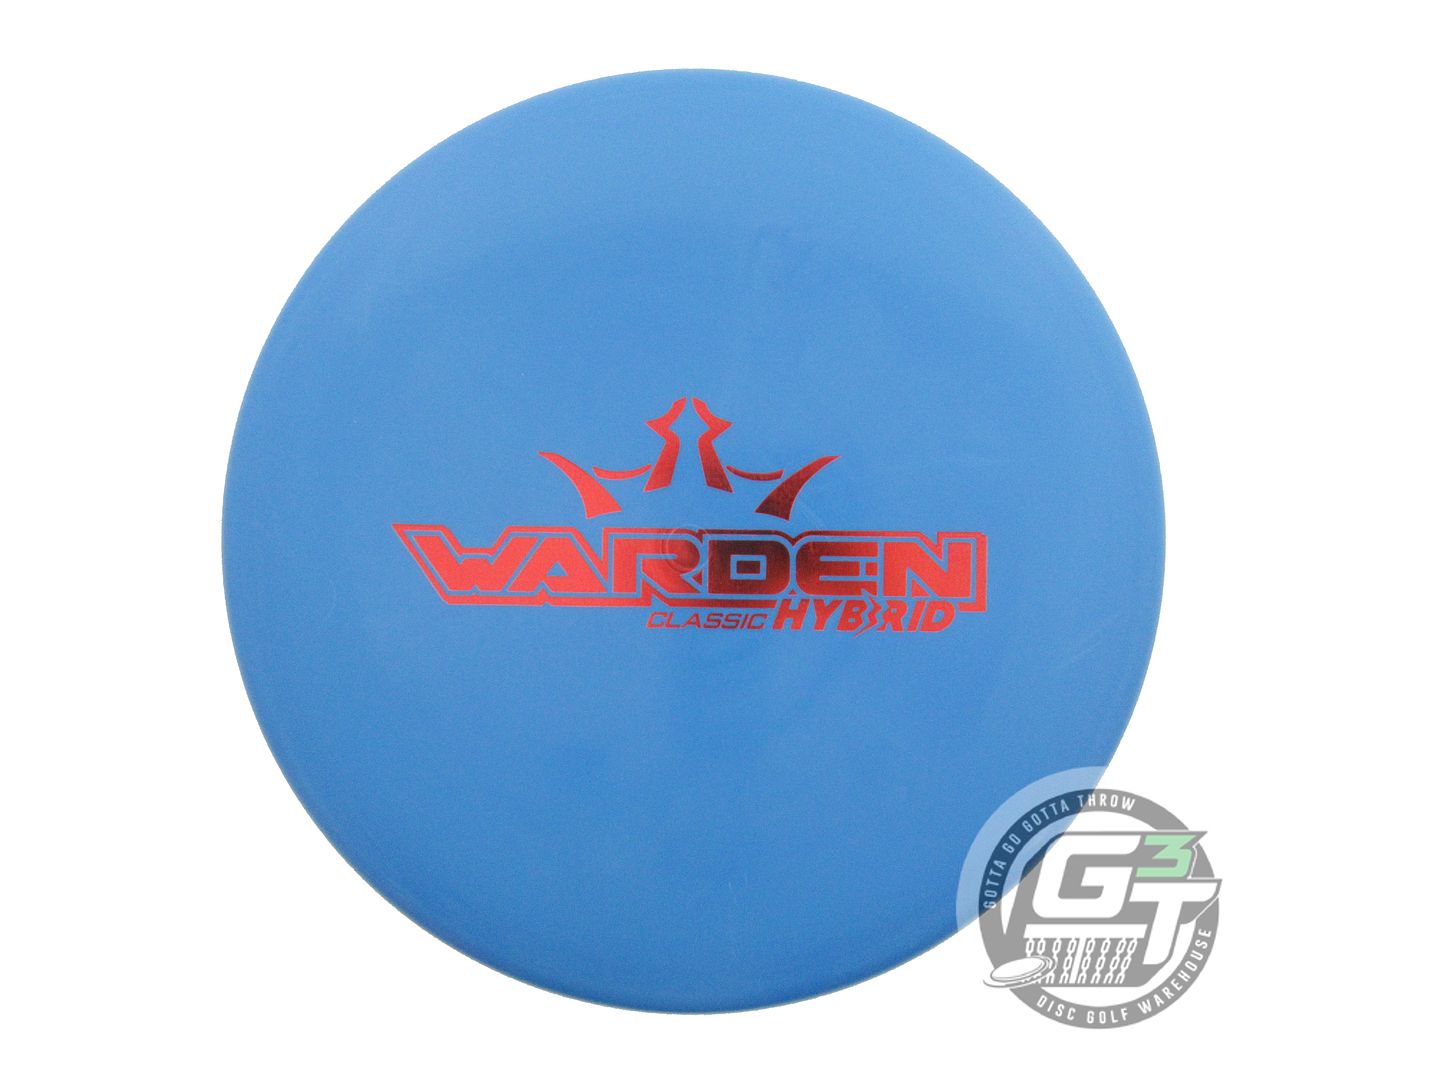 Dynamic Discs Limited Edition Classic Hybrid Warden Putter Golf Disc (Individually Listed)